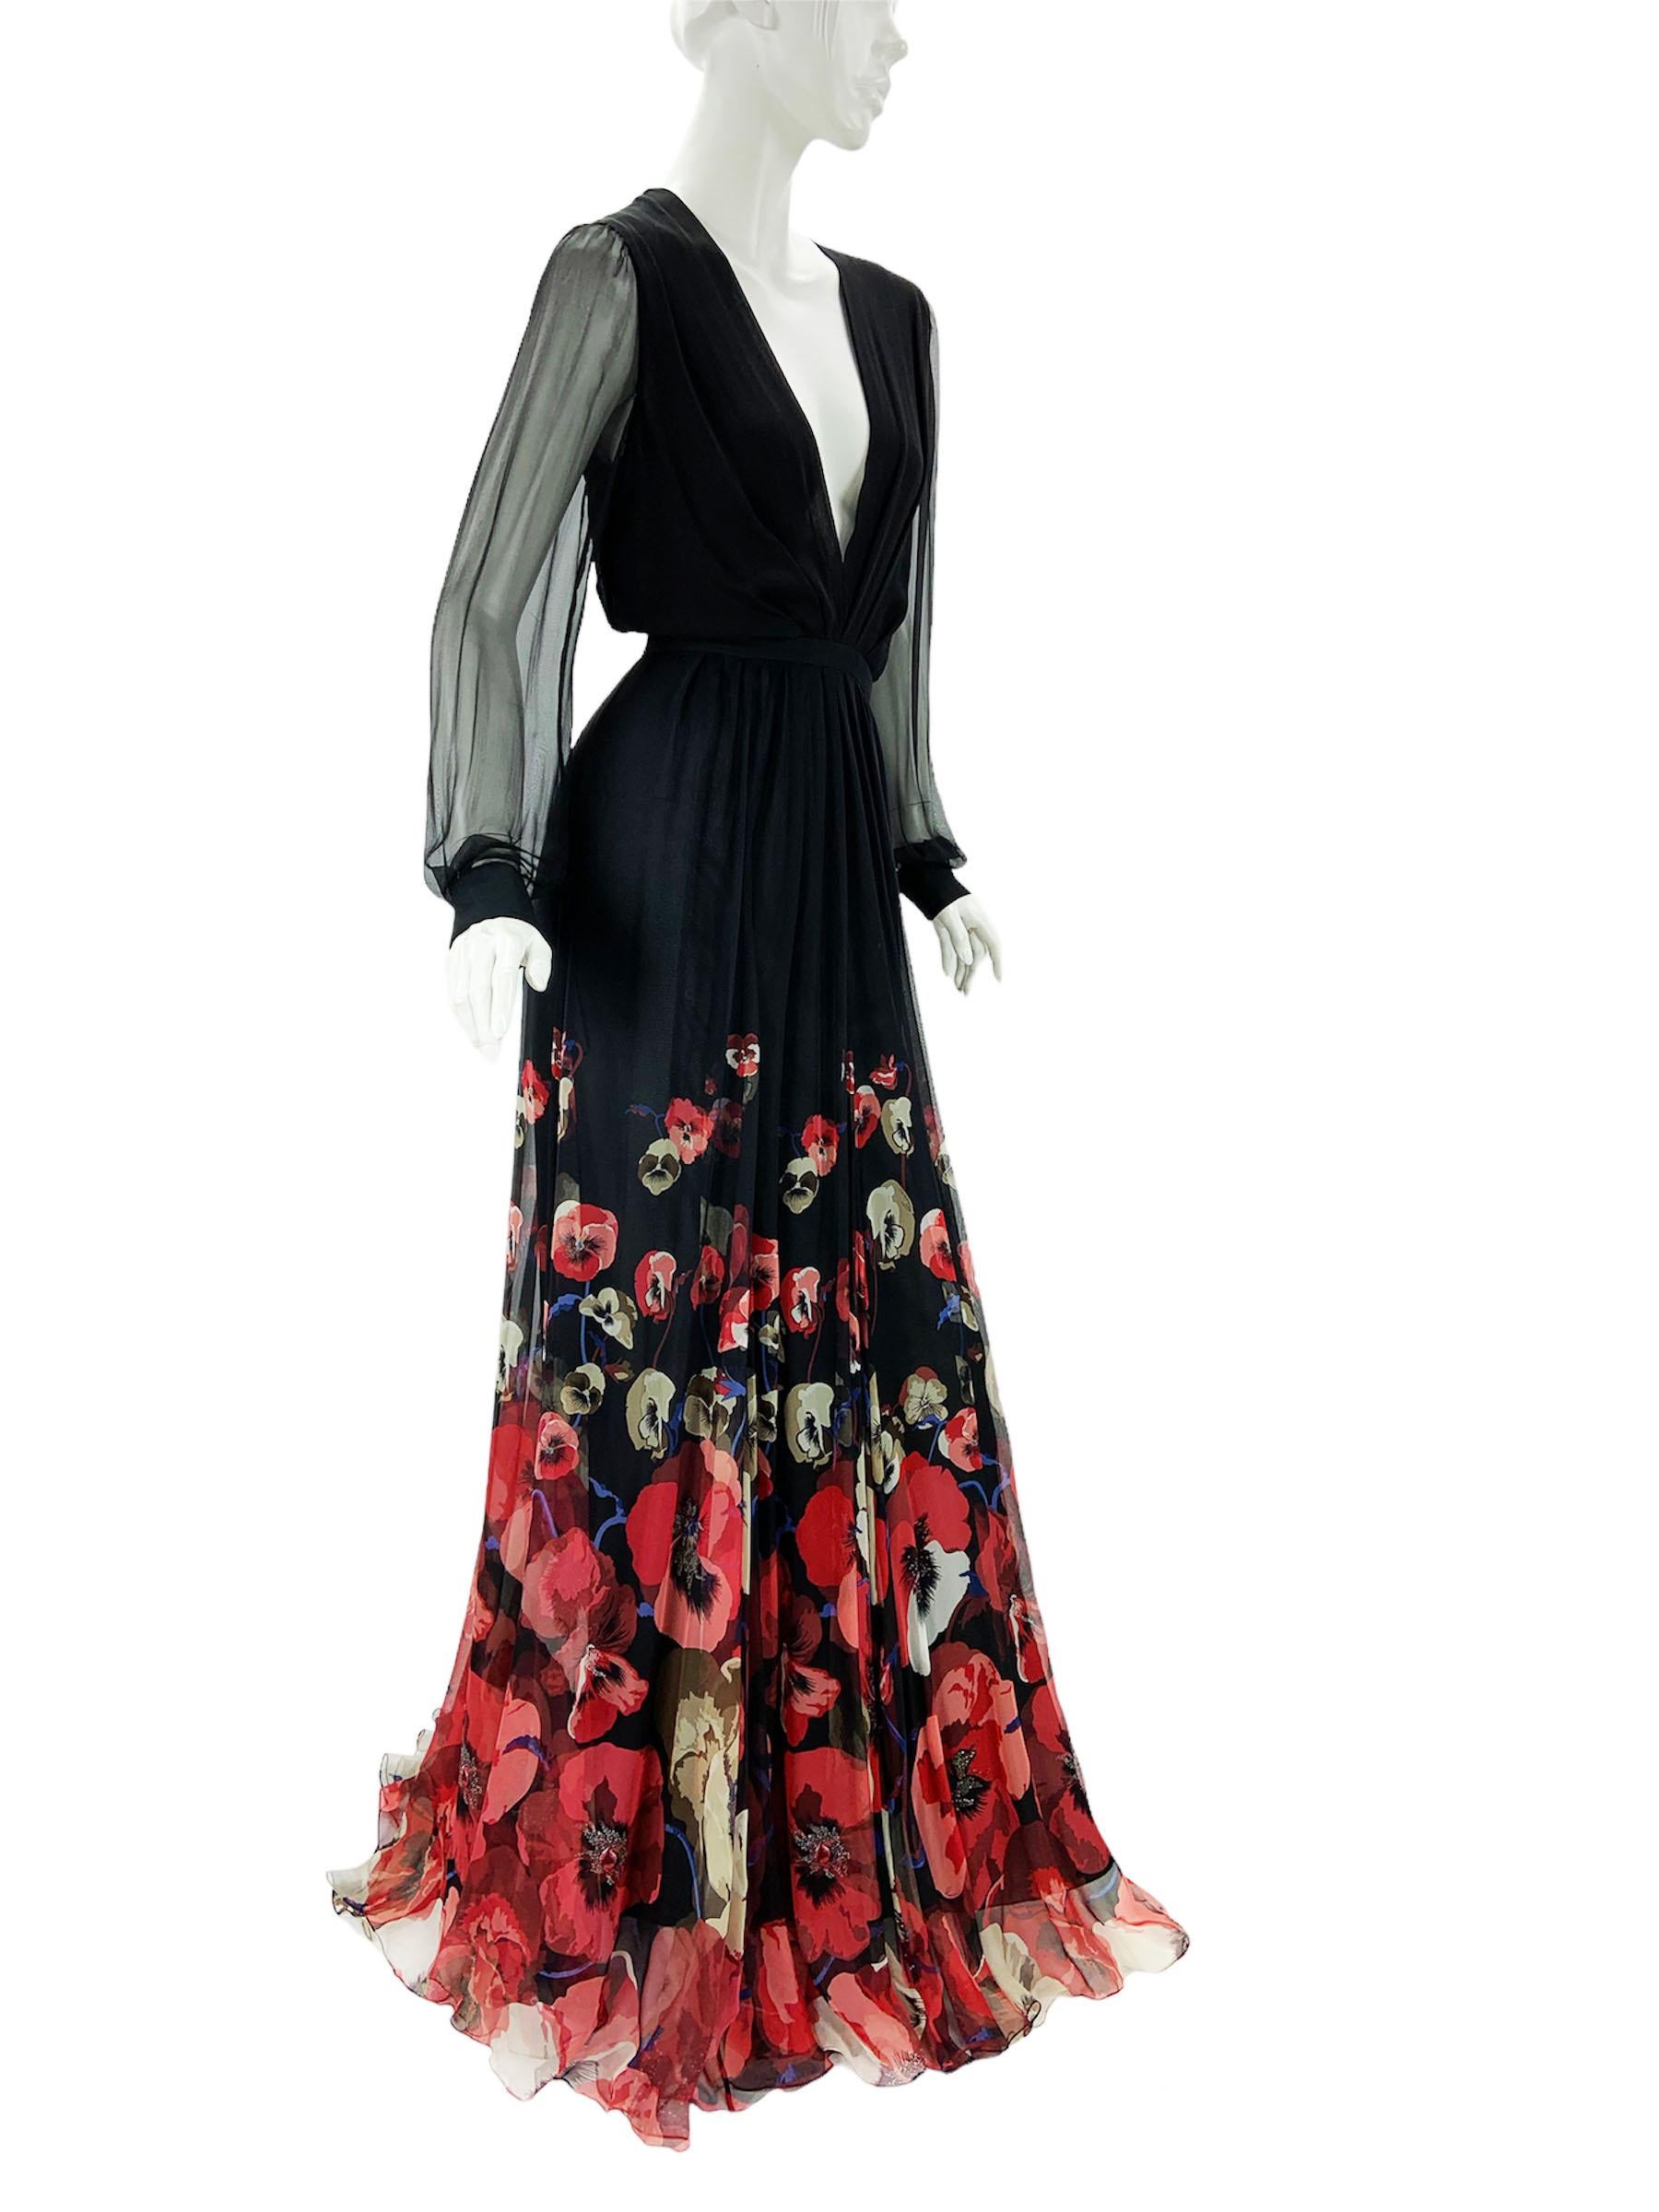 Gucci Black Silk Plunging Pansies Flowers Print Long Dress Gown Italian 42 US 6 In Excellent Condition For Sale In Montgomery, TX